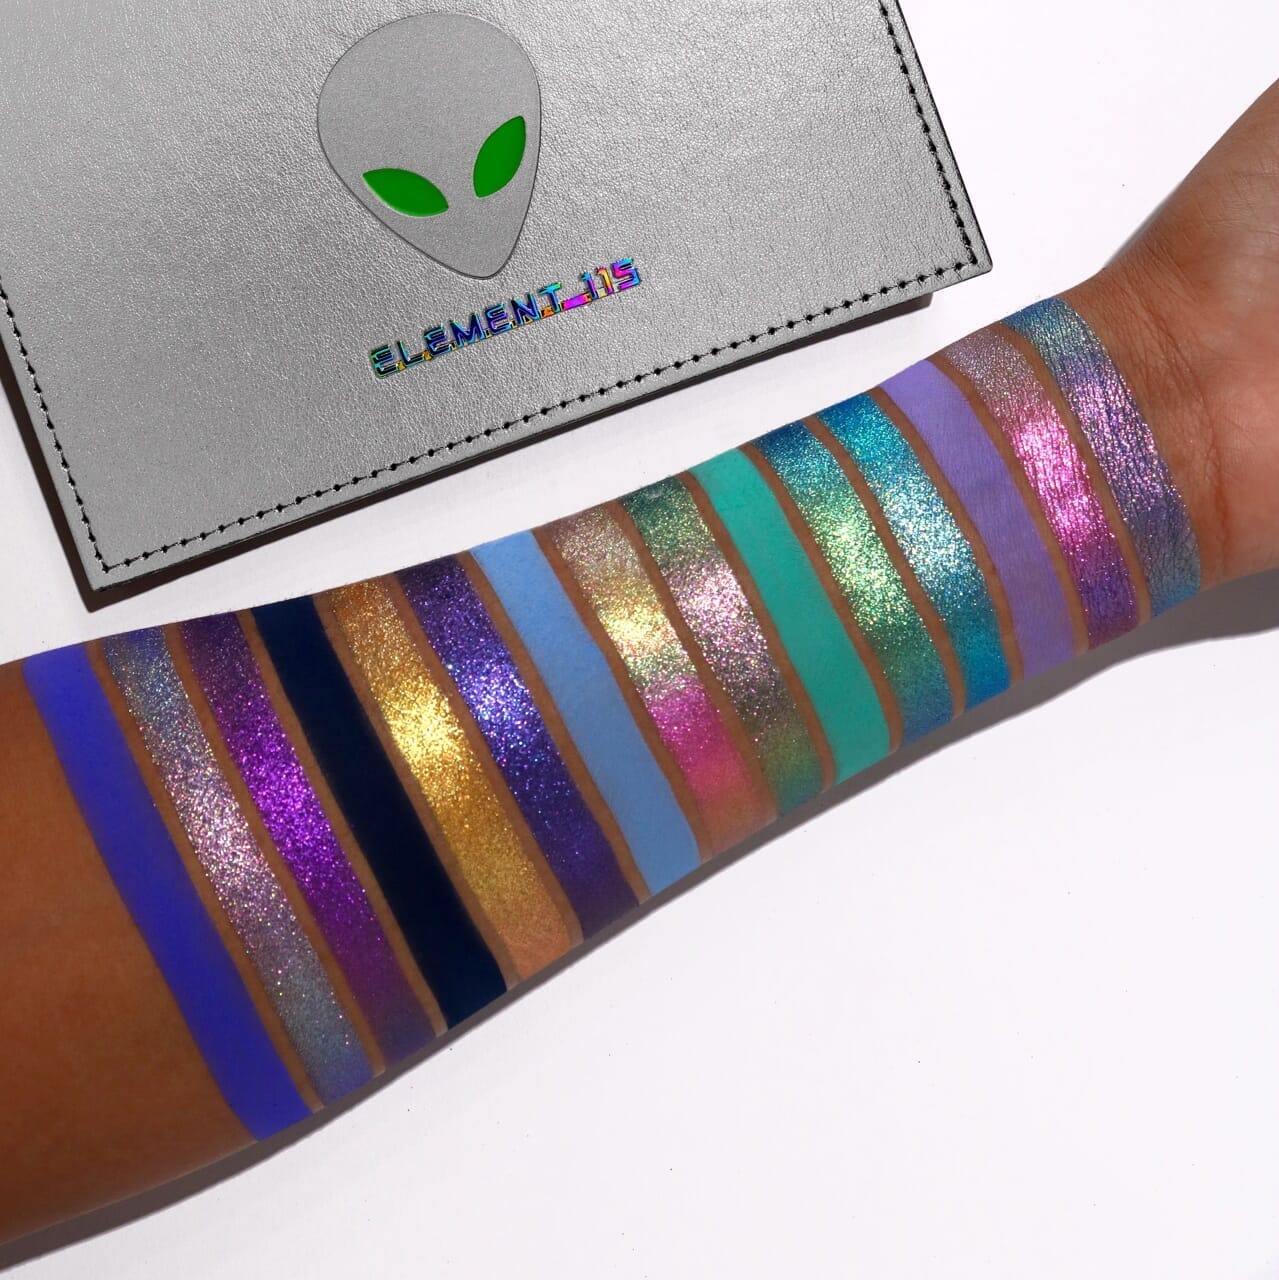 Element115 palette swatches by Adept Cosmetics